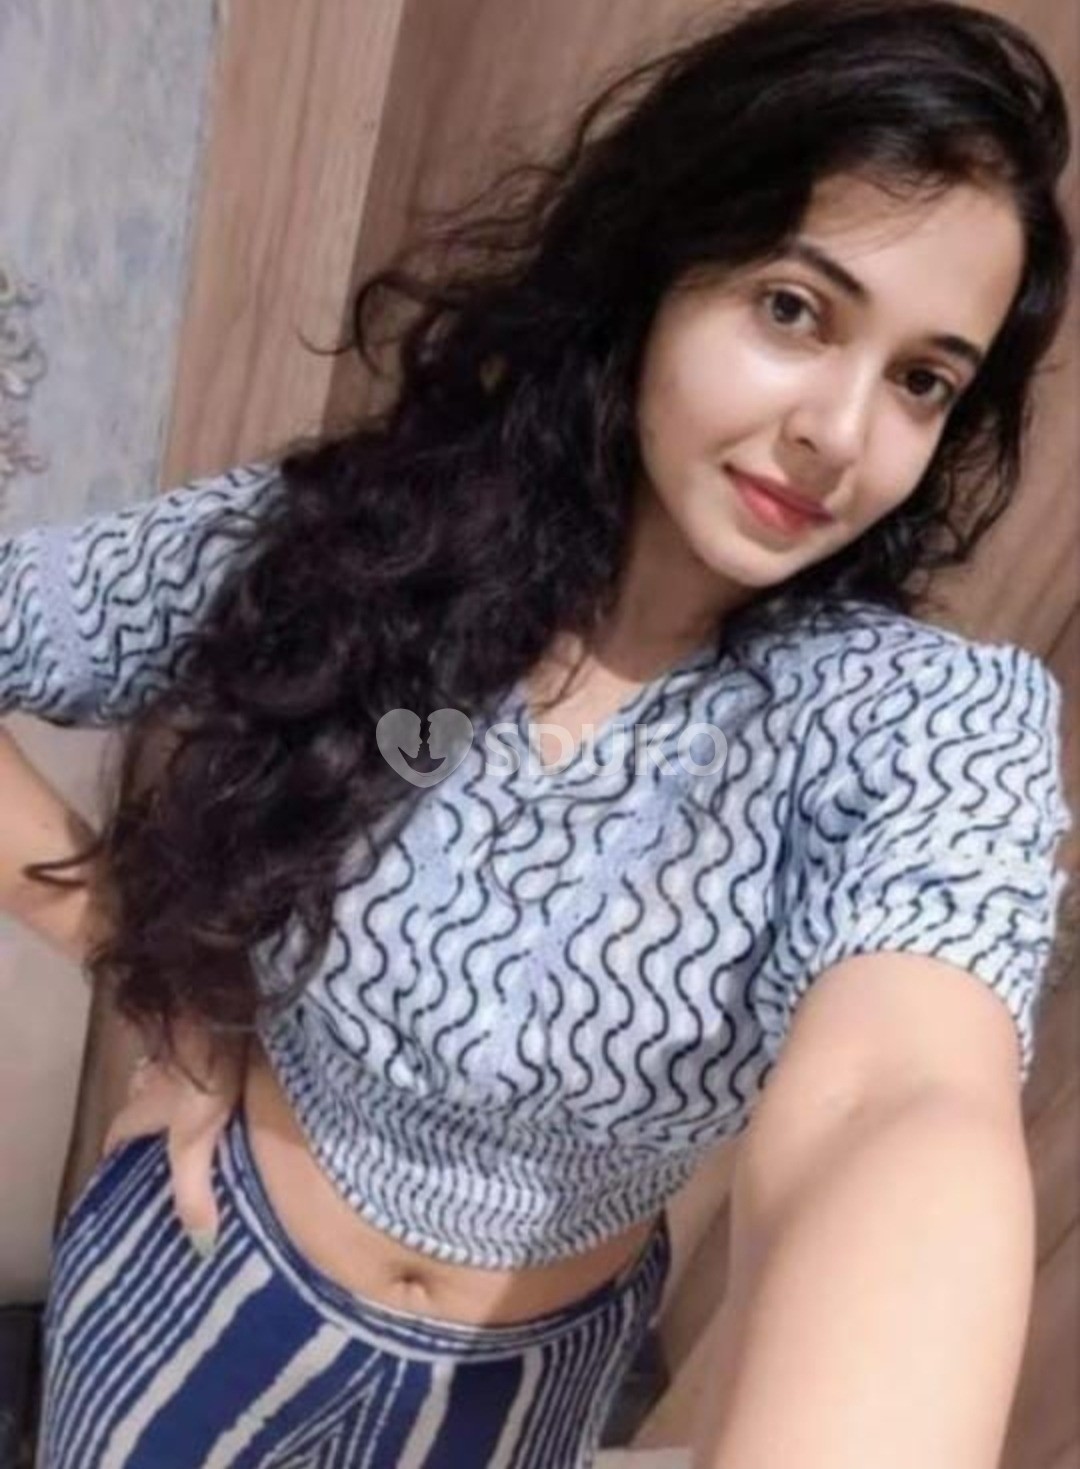 Coimbatore LOW PRICE🔸n✅( 24×7 ) SERVICE A AVAILABLE 100% SAFE AND S SECURE UNLIMITED ENJOY HOT COLLEGE GIRL HOUSEW